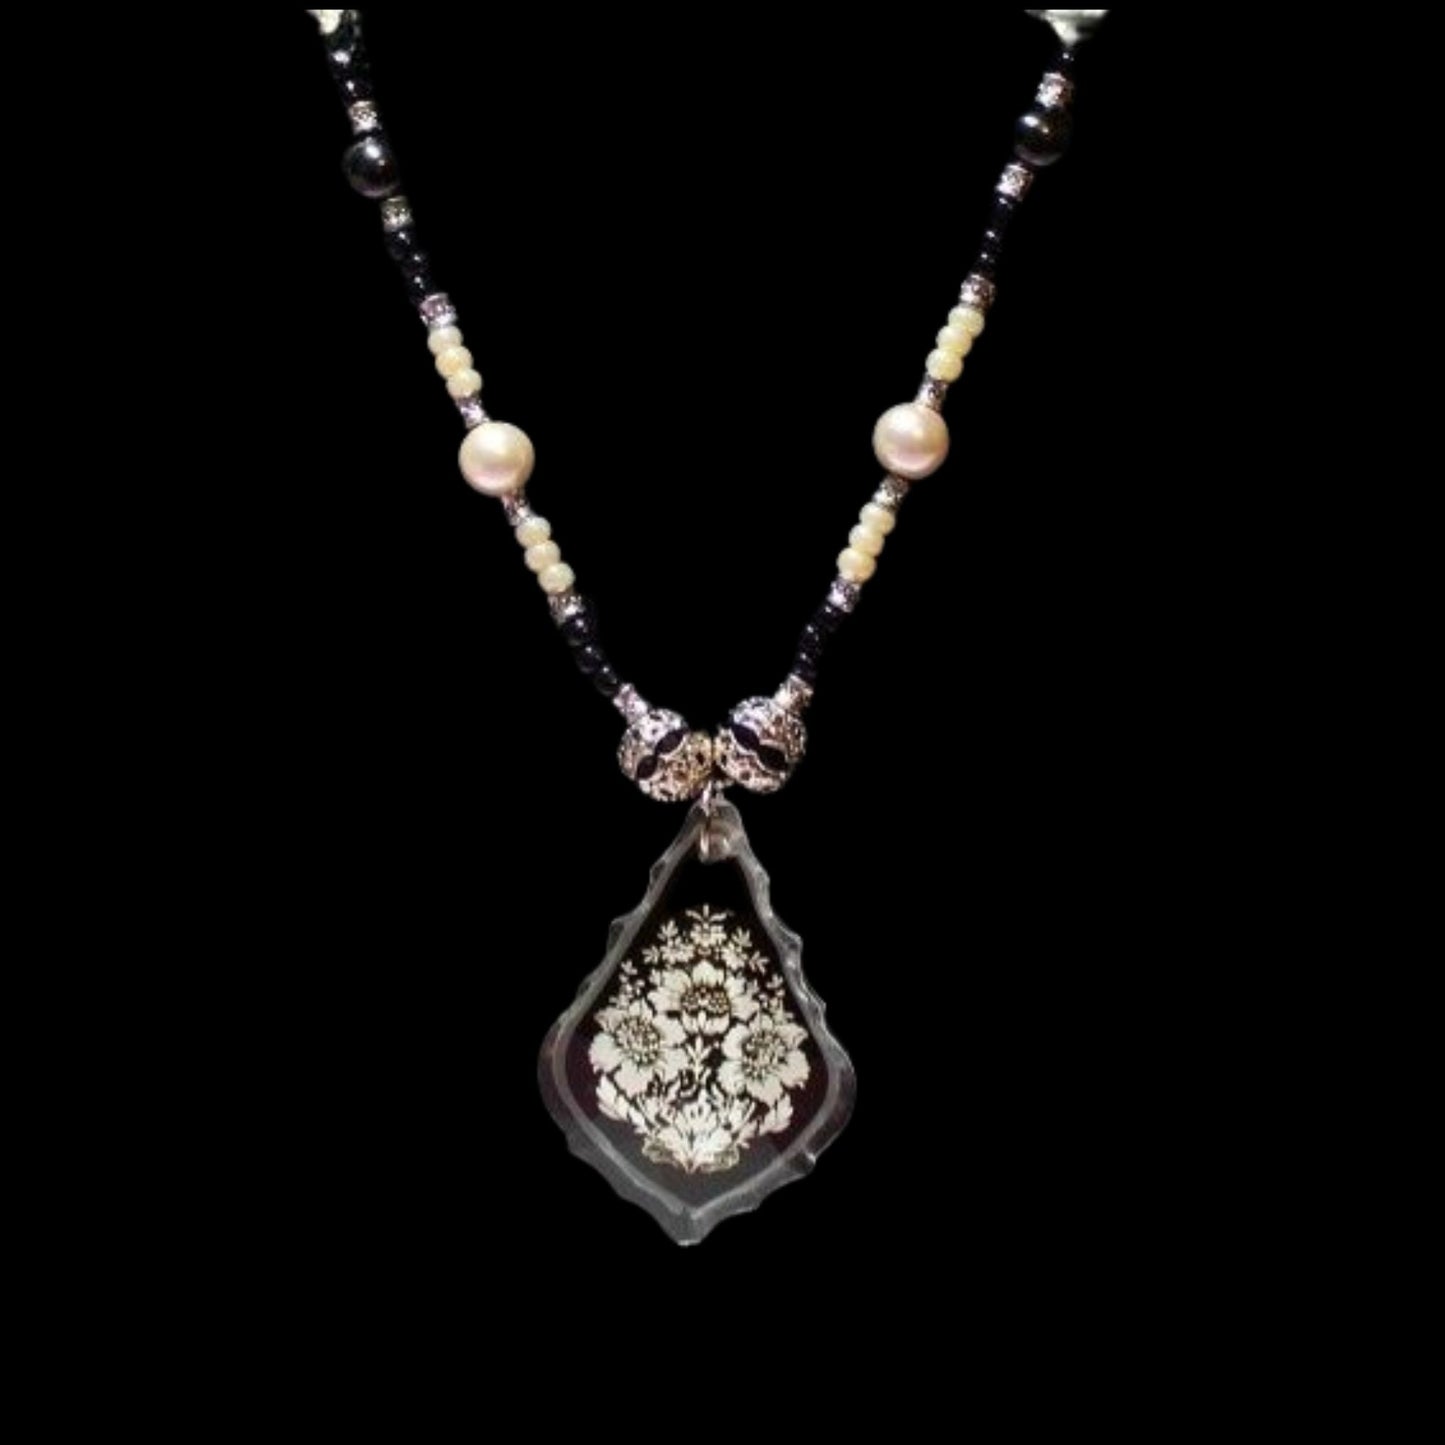 Floral Baroque Glass Pendant Bead Necklace